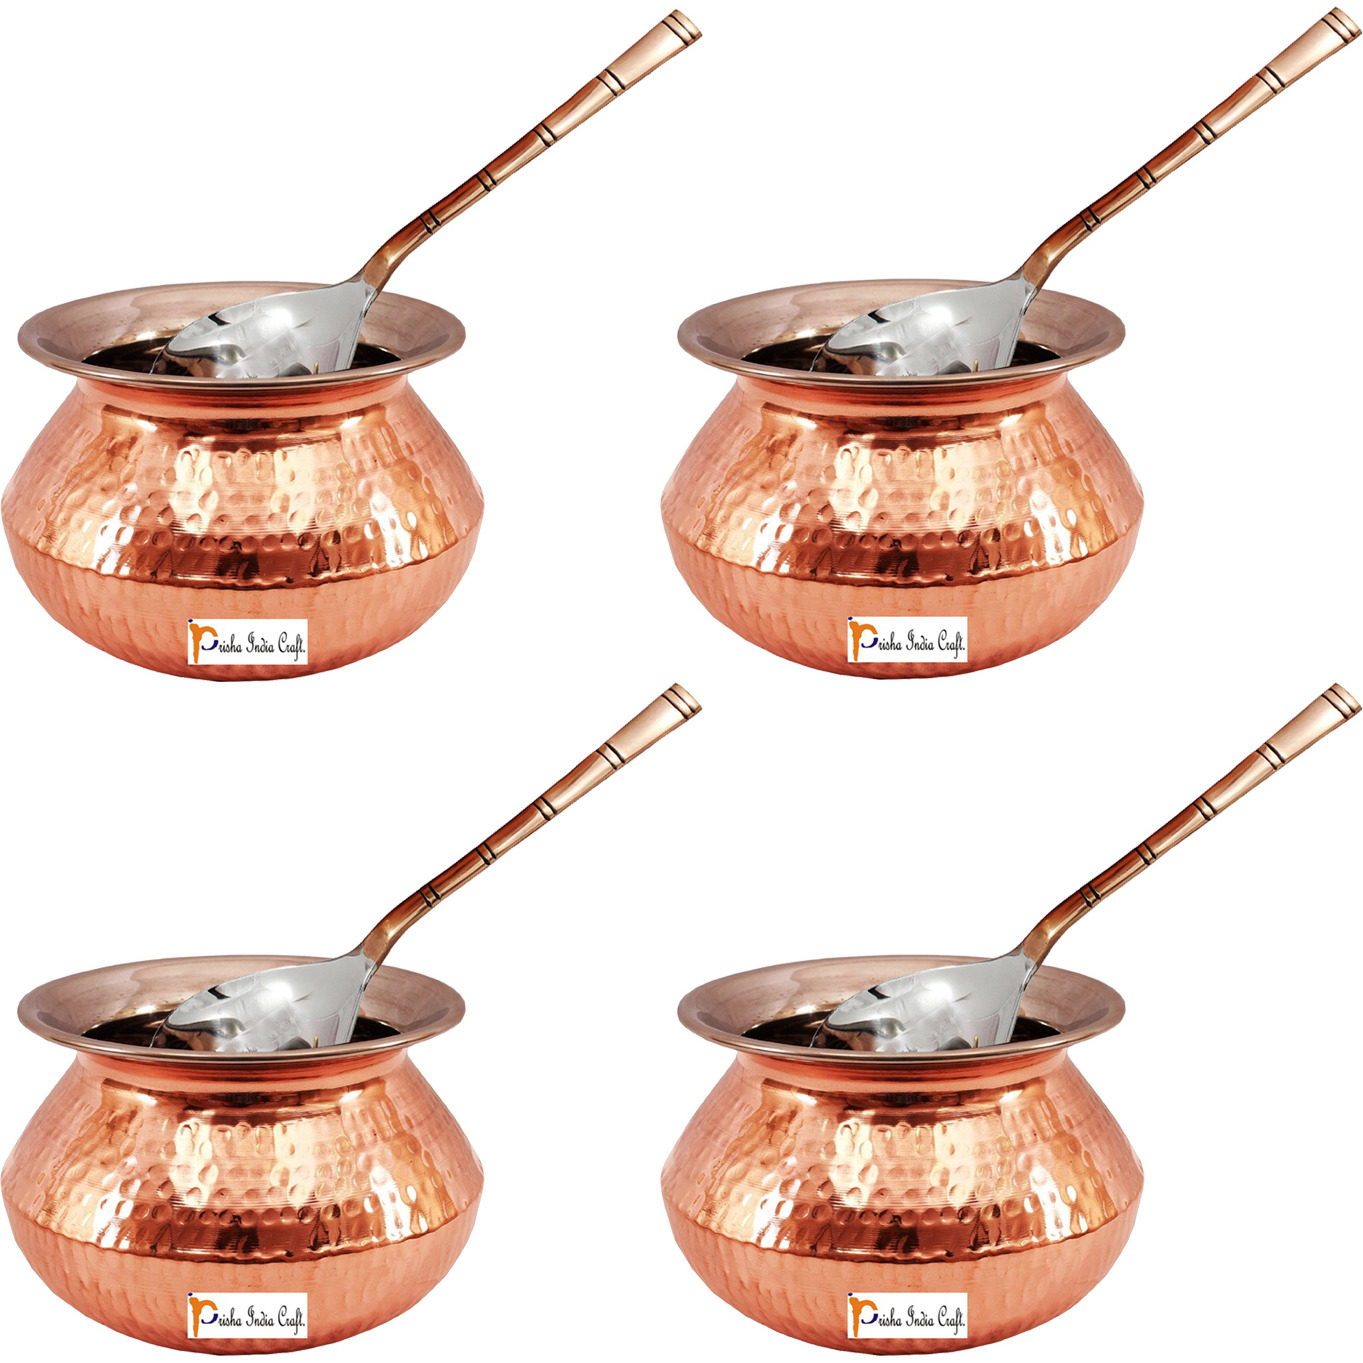 Set of 4 Prisha India Craft B. High Quality Handmade Steel Copper Casserole and Serving Spoon - Set of Copper Handi and Serving Spoon - Copper Bowl Dia - 5  X Height - 3.25  - Christmas Gift